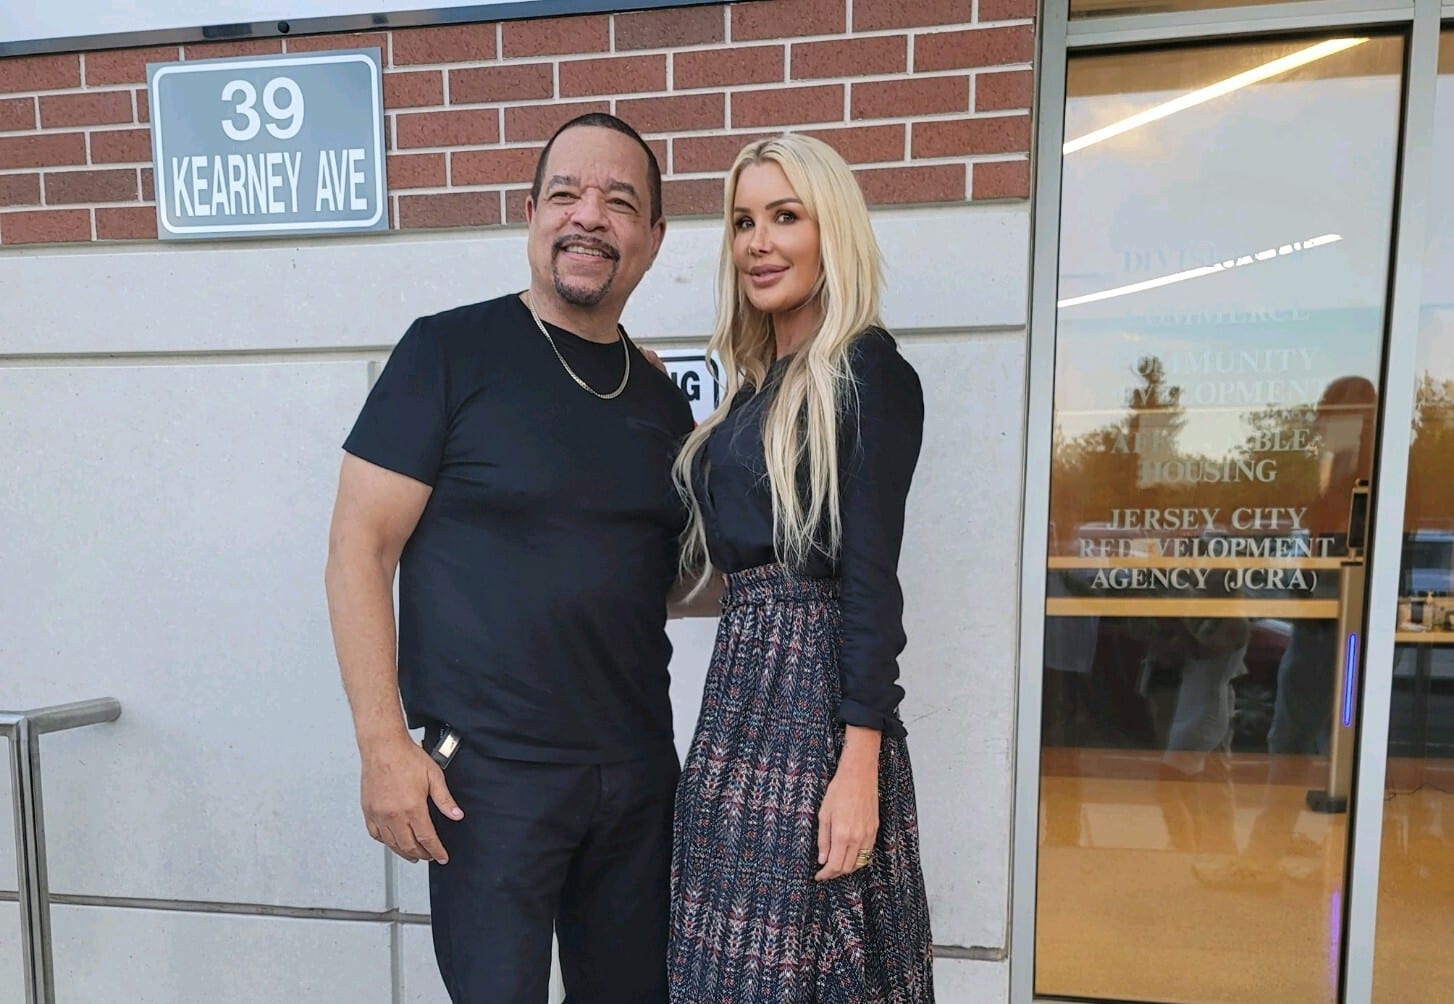 Exclusive: Ice T and Charis B’s New Jersey Dispensary Gets Green-Lighted